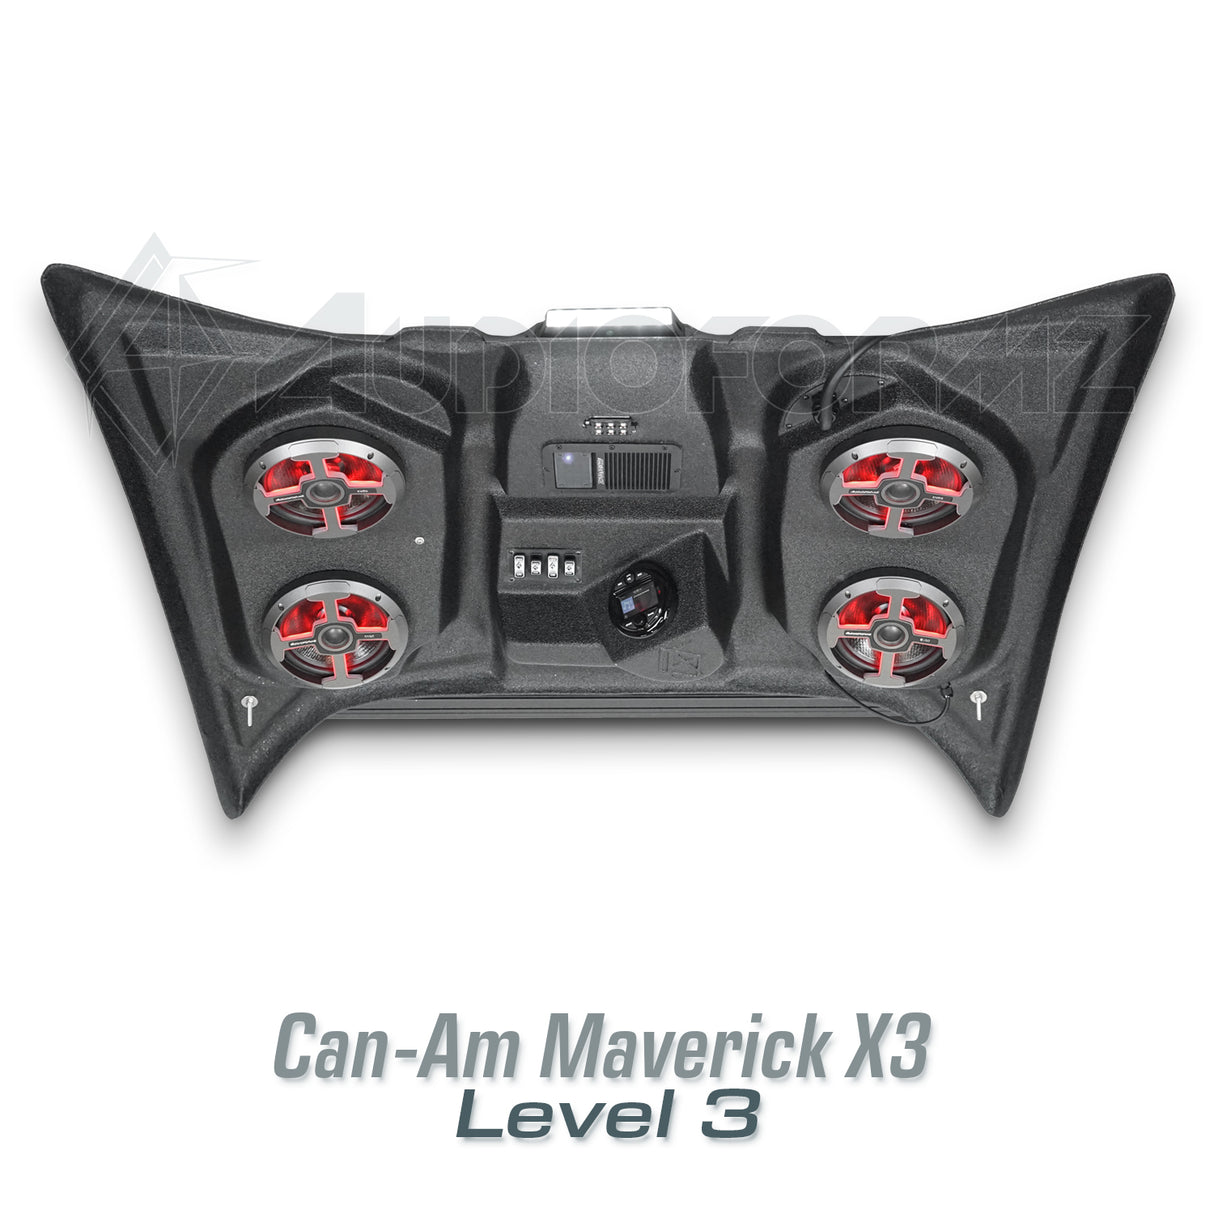 2017+ Can-Am Maverick X3 Stereo Top (2-Seat)